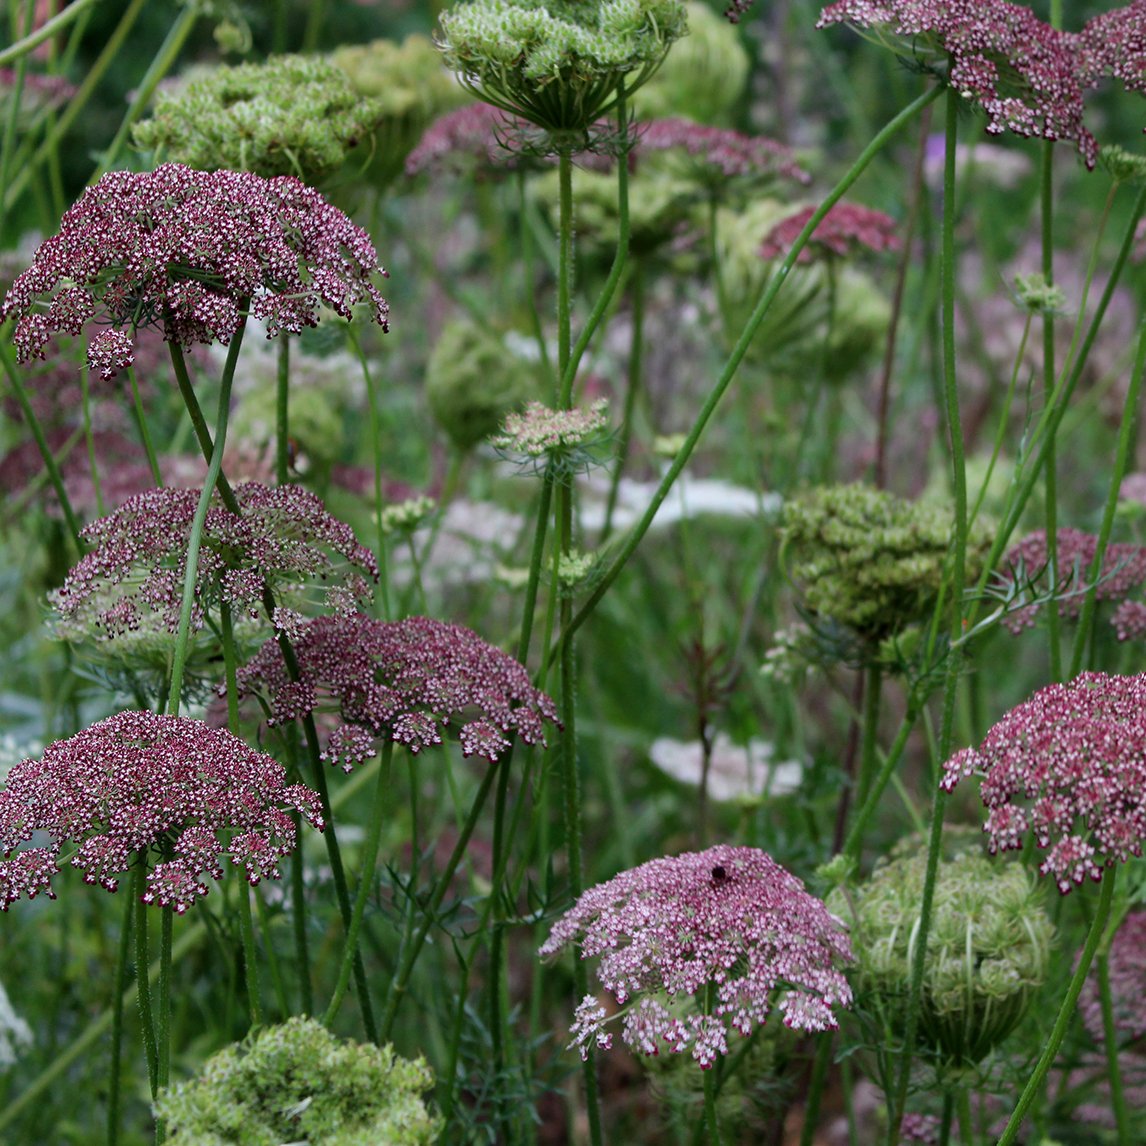 Chocolate Queen Anne's Lace - The Diggers Club